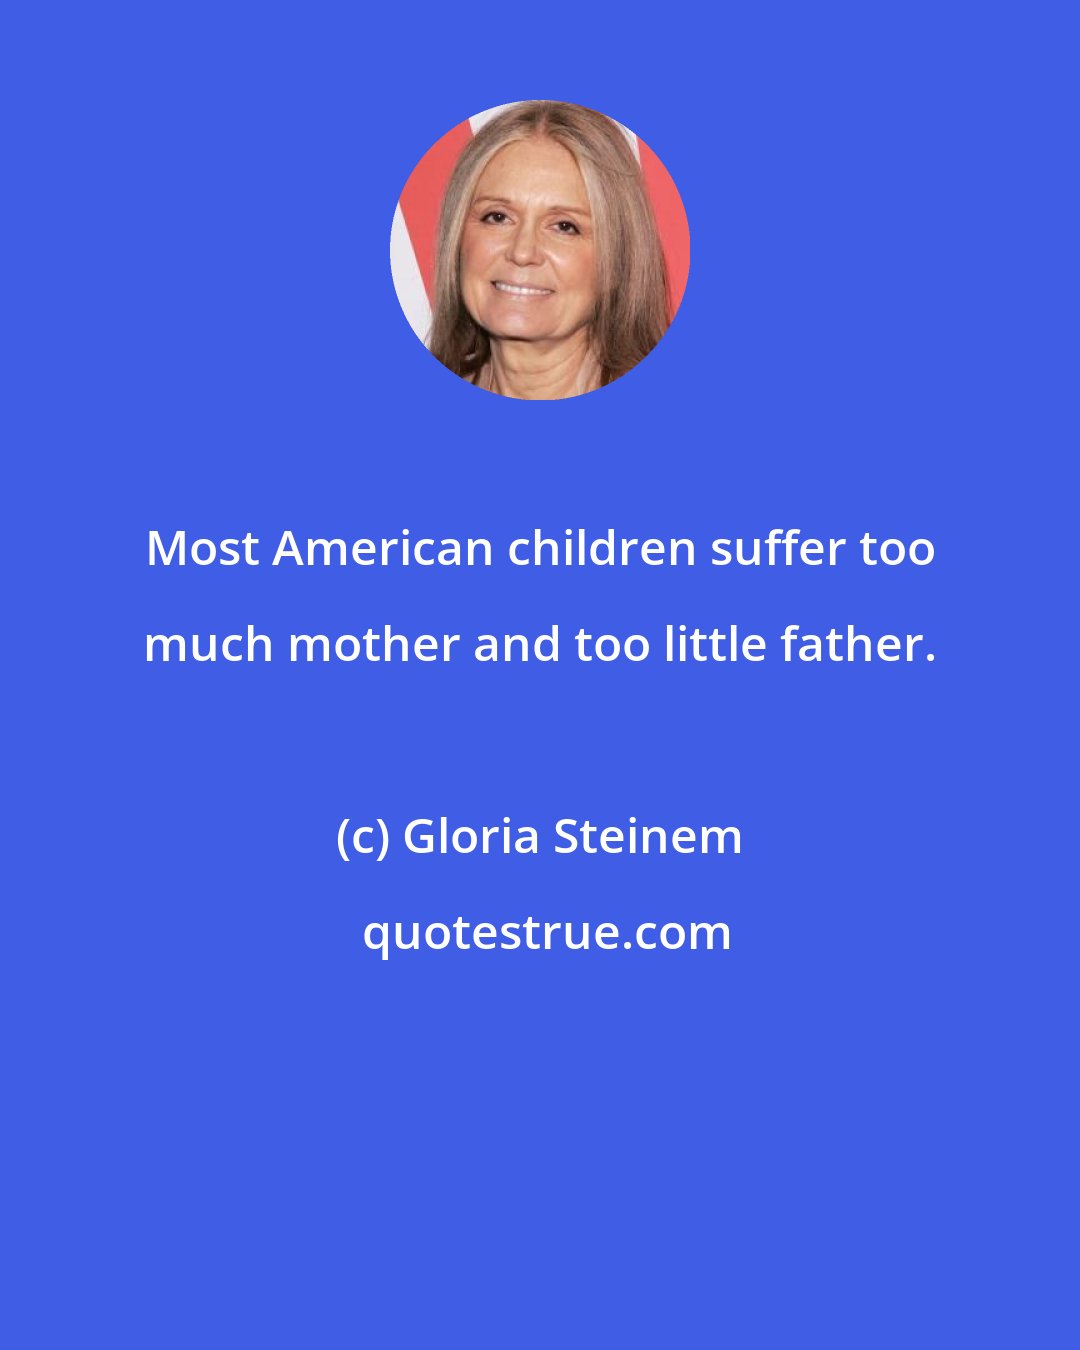 Gloria Steinem: Most American children suffer too much mother and too little father.